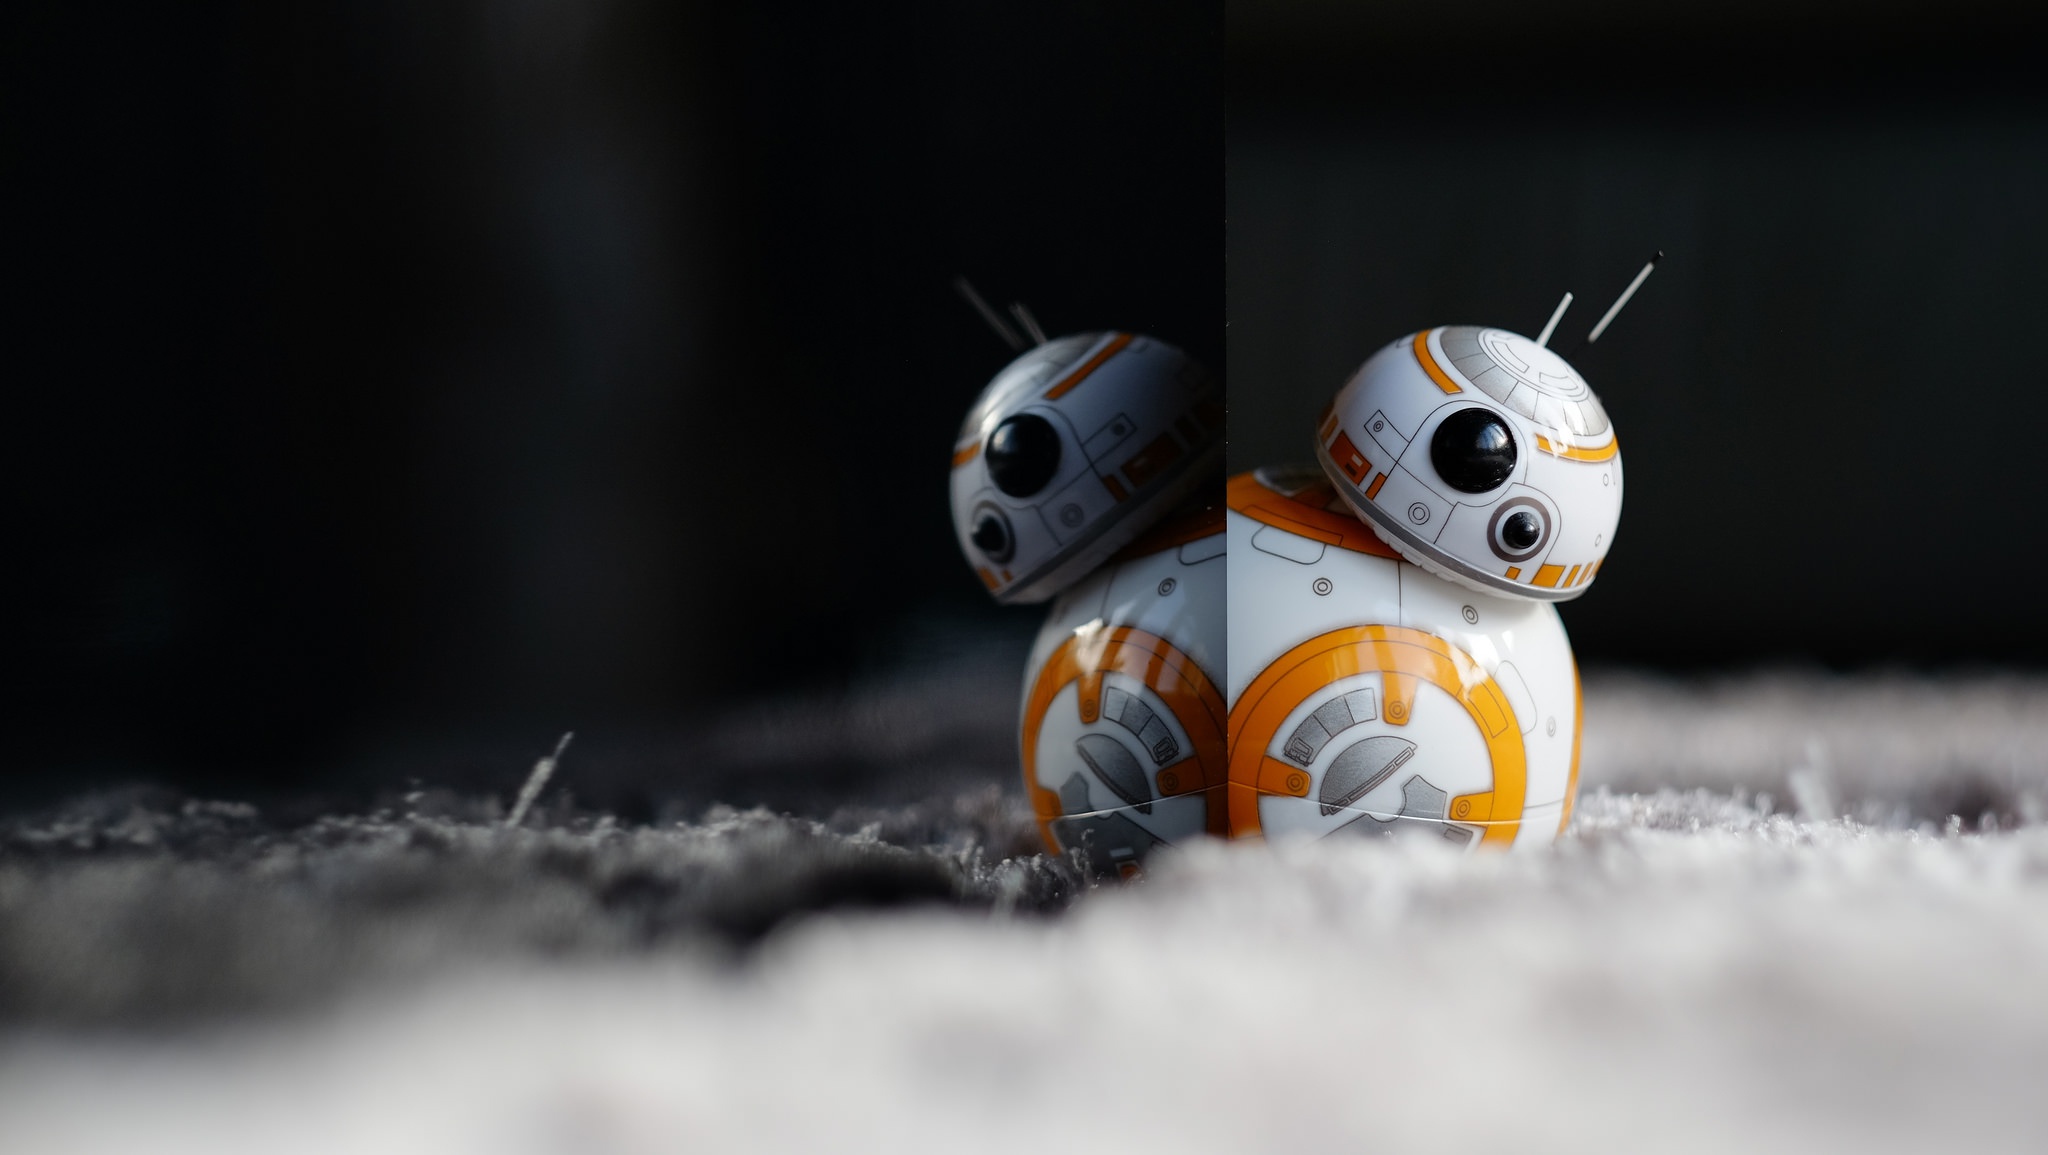 Toy Reflection Star Wars BB 8 Droid 2048x1155